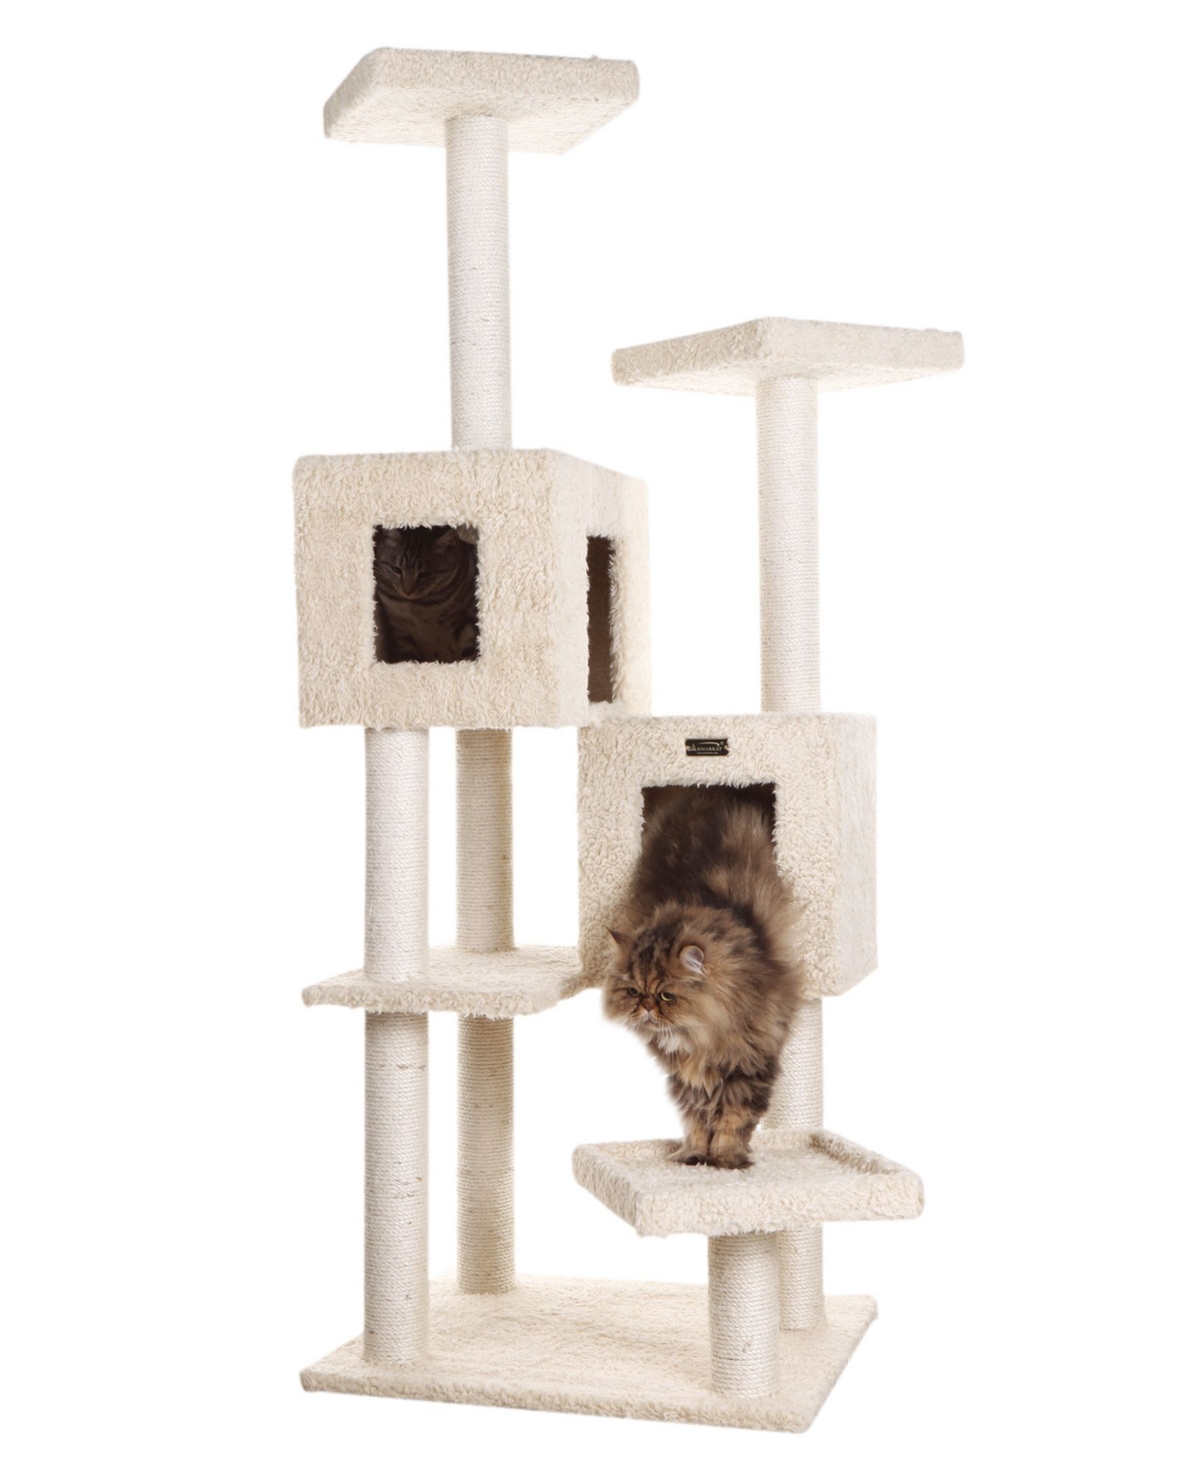 Multi-Level Real Wood Cat Tree With Two Spacious Condos - Beige